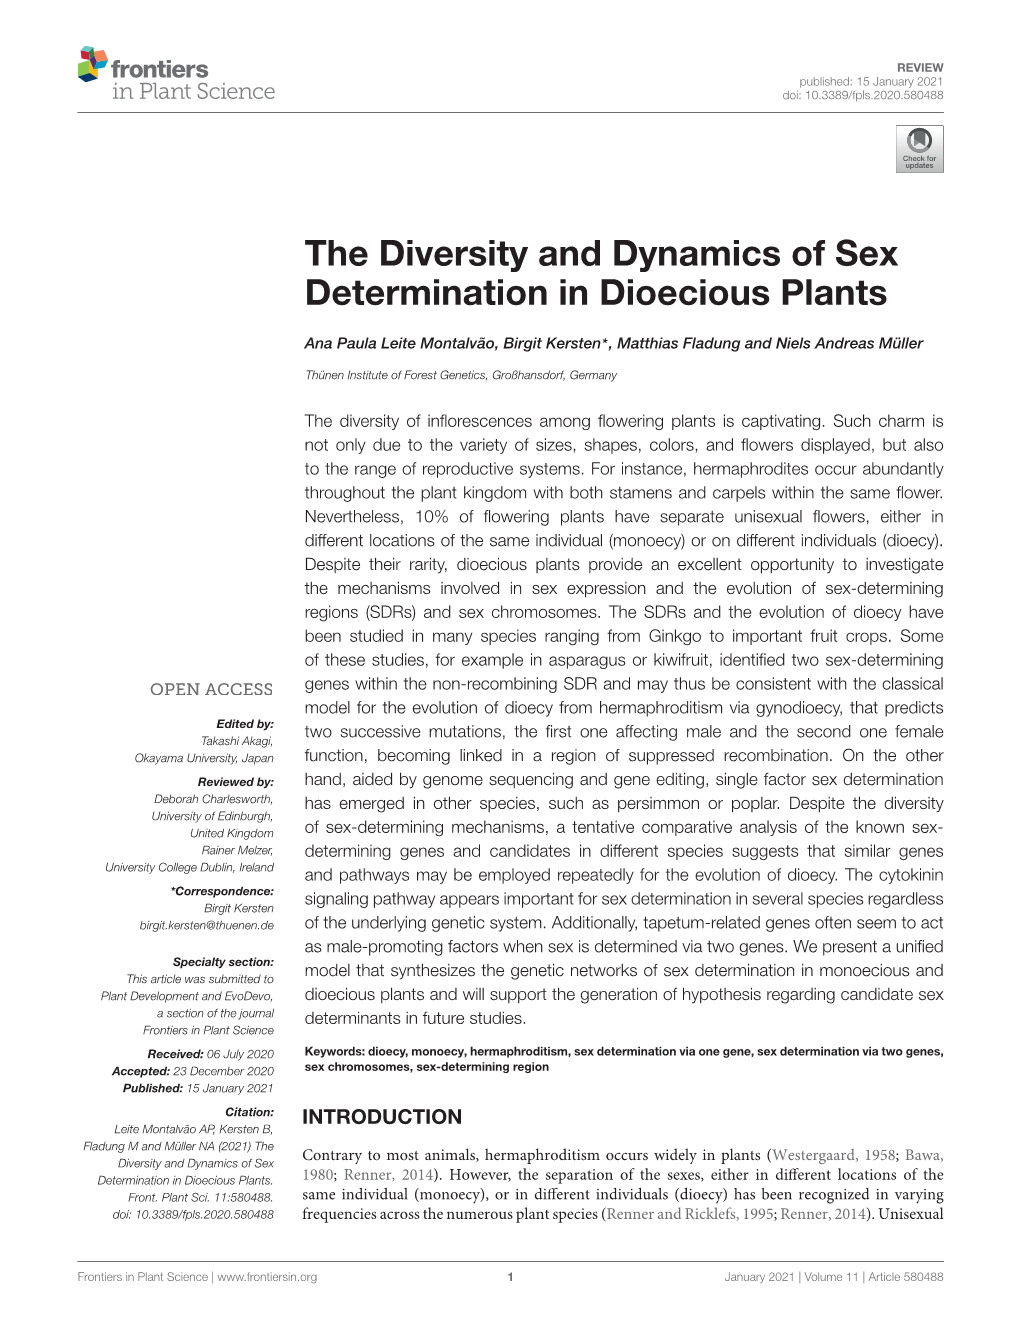 The Diversity and Dynamics of Sex Determination in Dioecious Plants